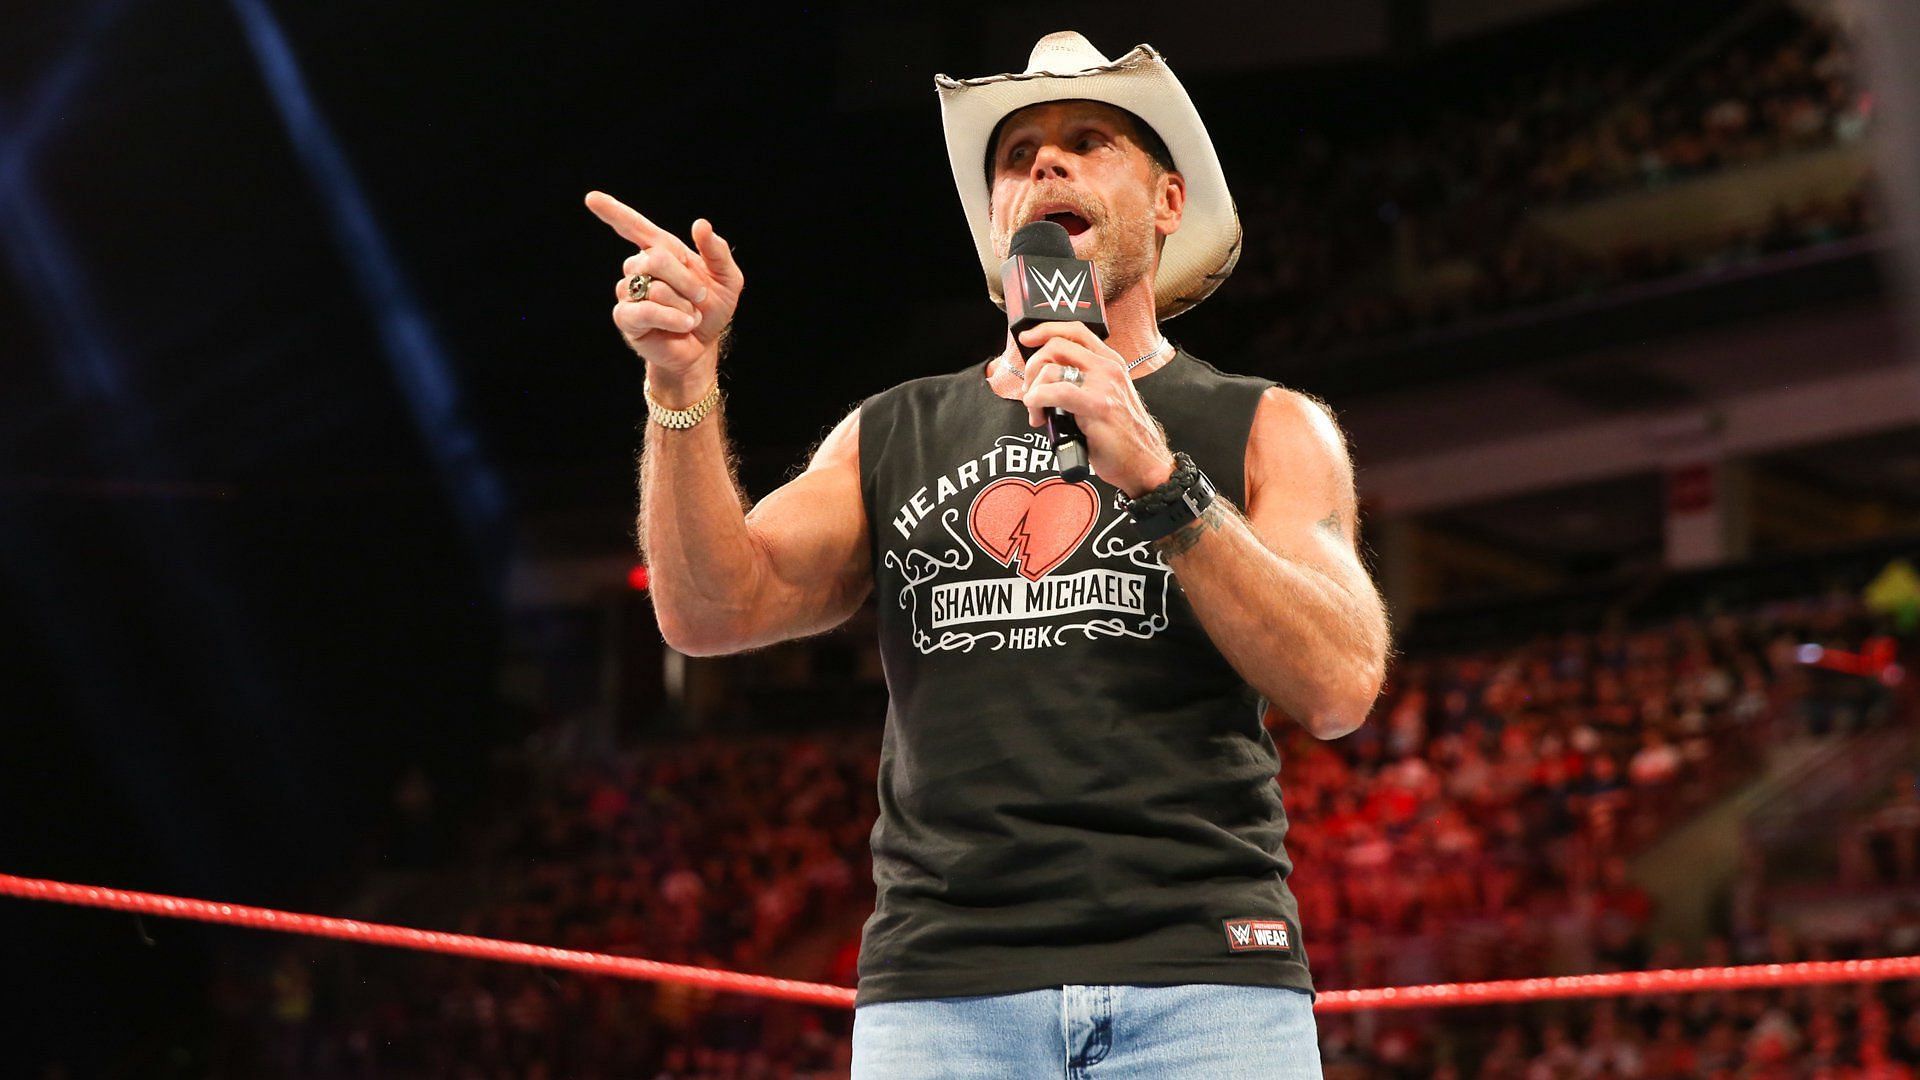 Shawn Michaels reacted to a title change